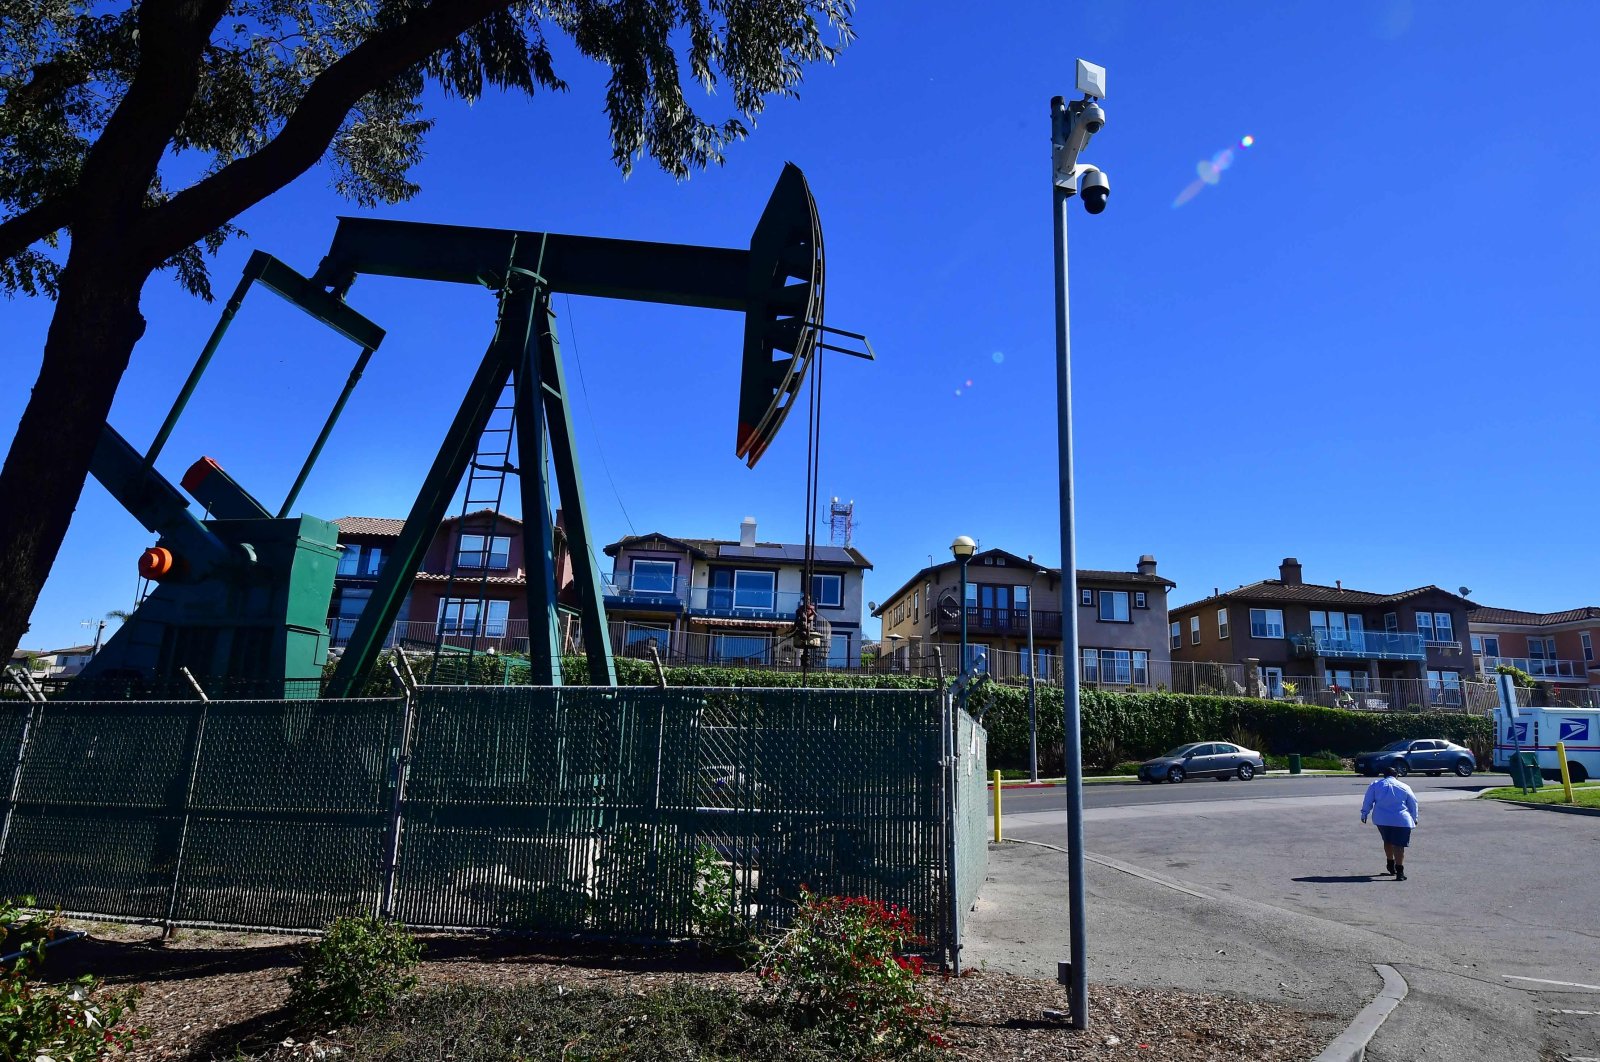 A woman walks past a working oil pumpjack in front of million dollar homes in Signal Hill, Los Angeles County, California, U.S., Feb. 17, 2022. (AFP Photo)